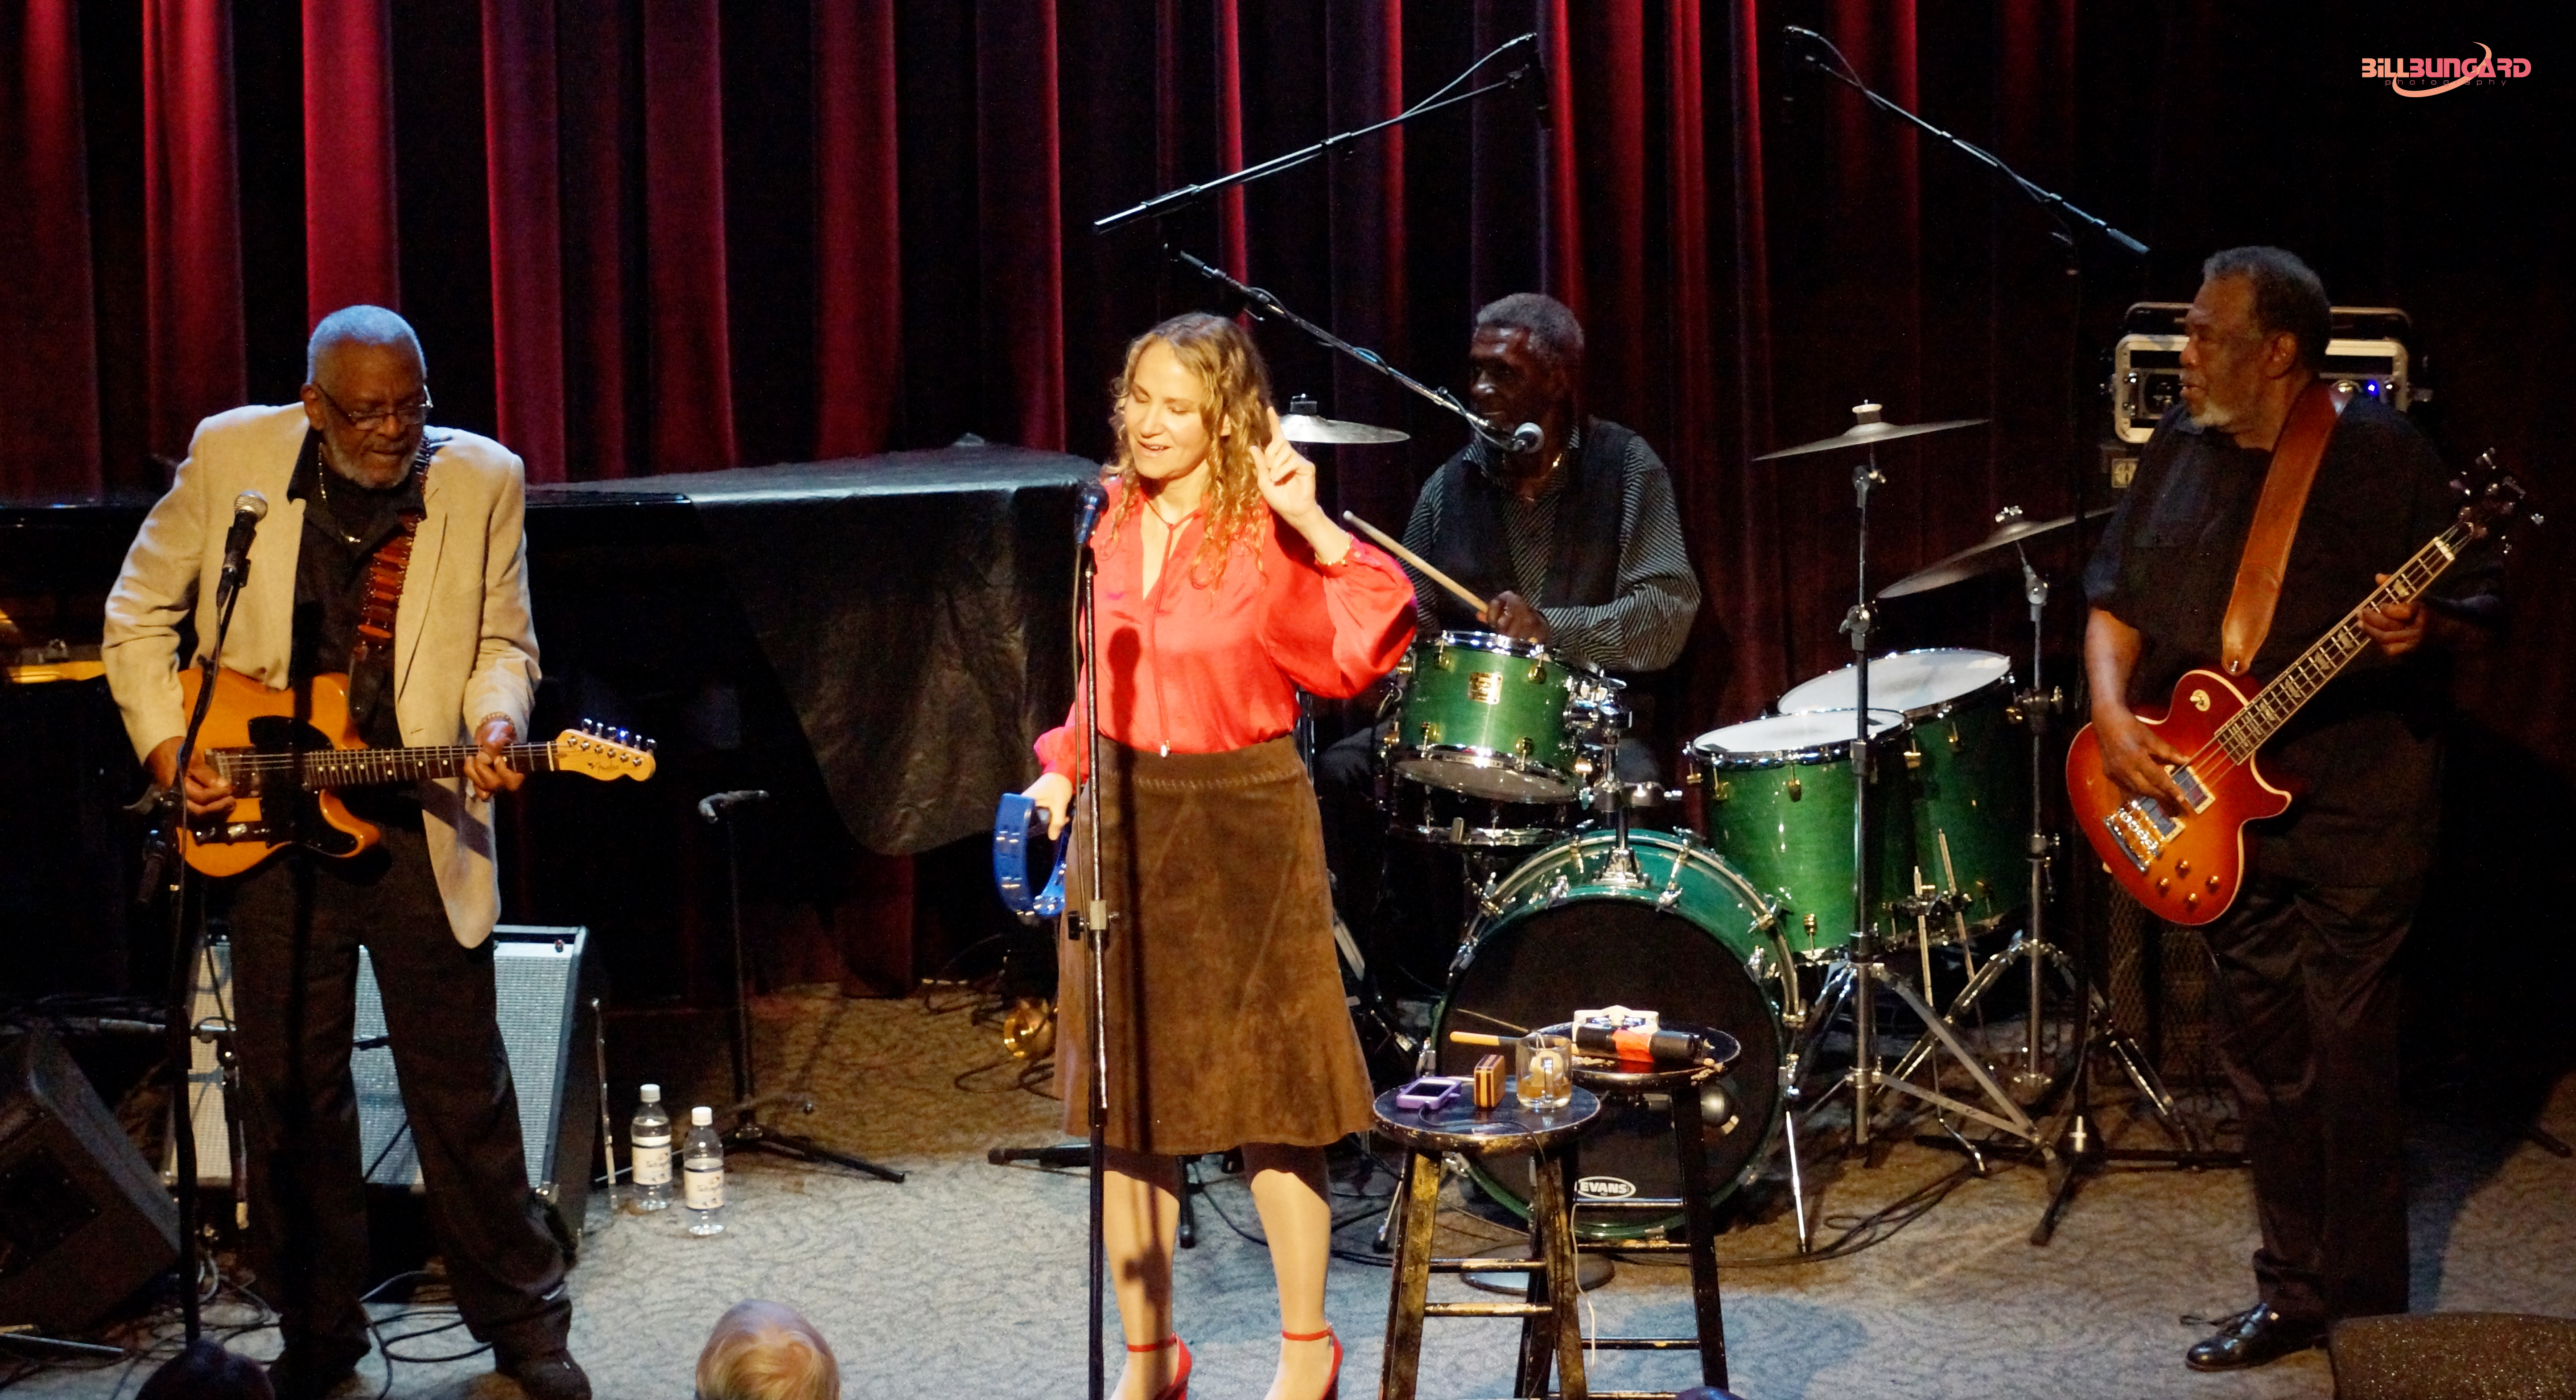 Joan Osborne and Holmes Brothers at Jazz Alley (Photo by Bill Bungard)